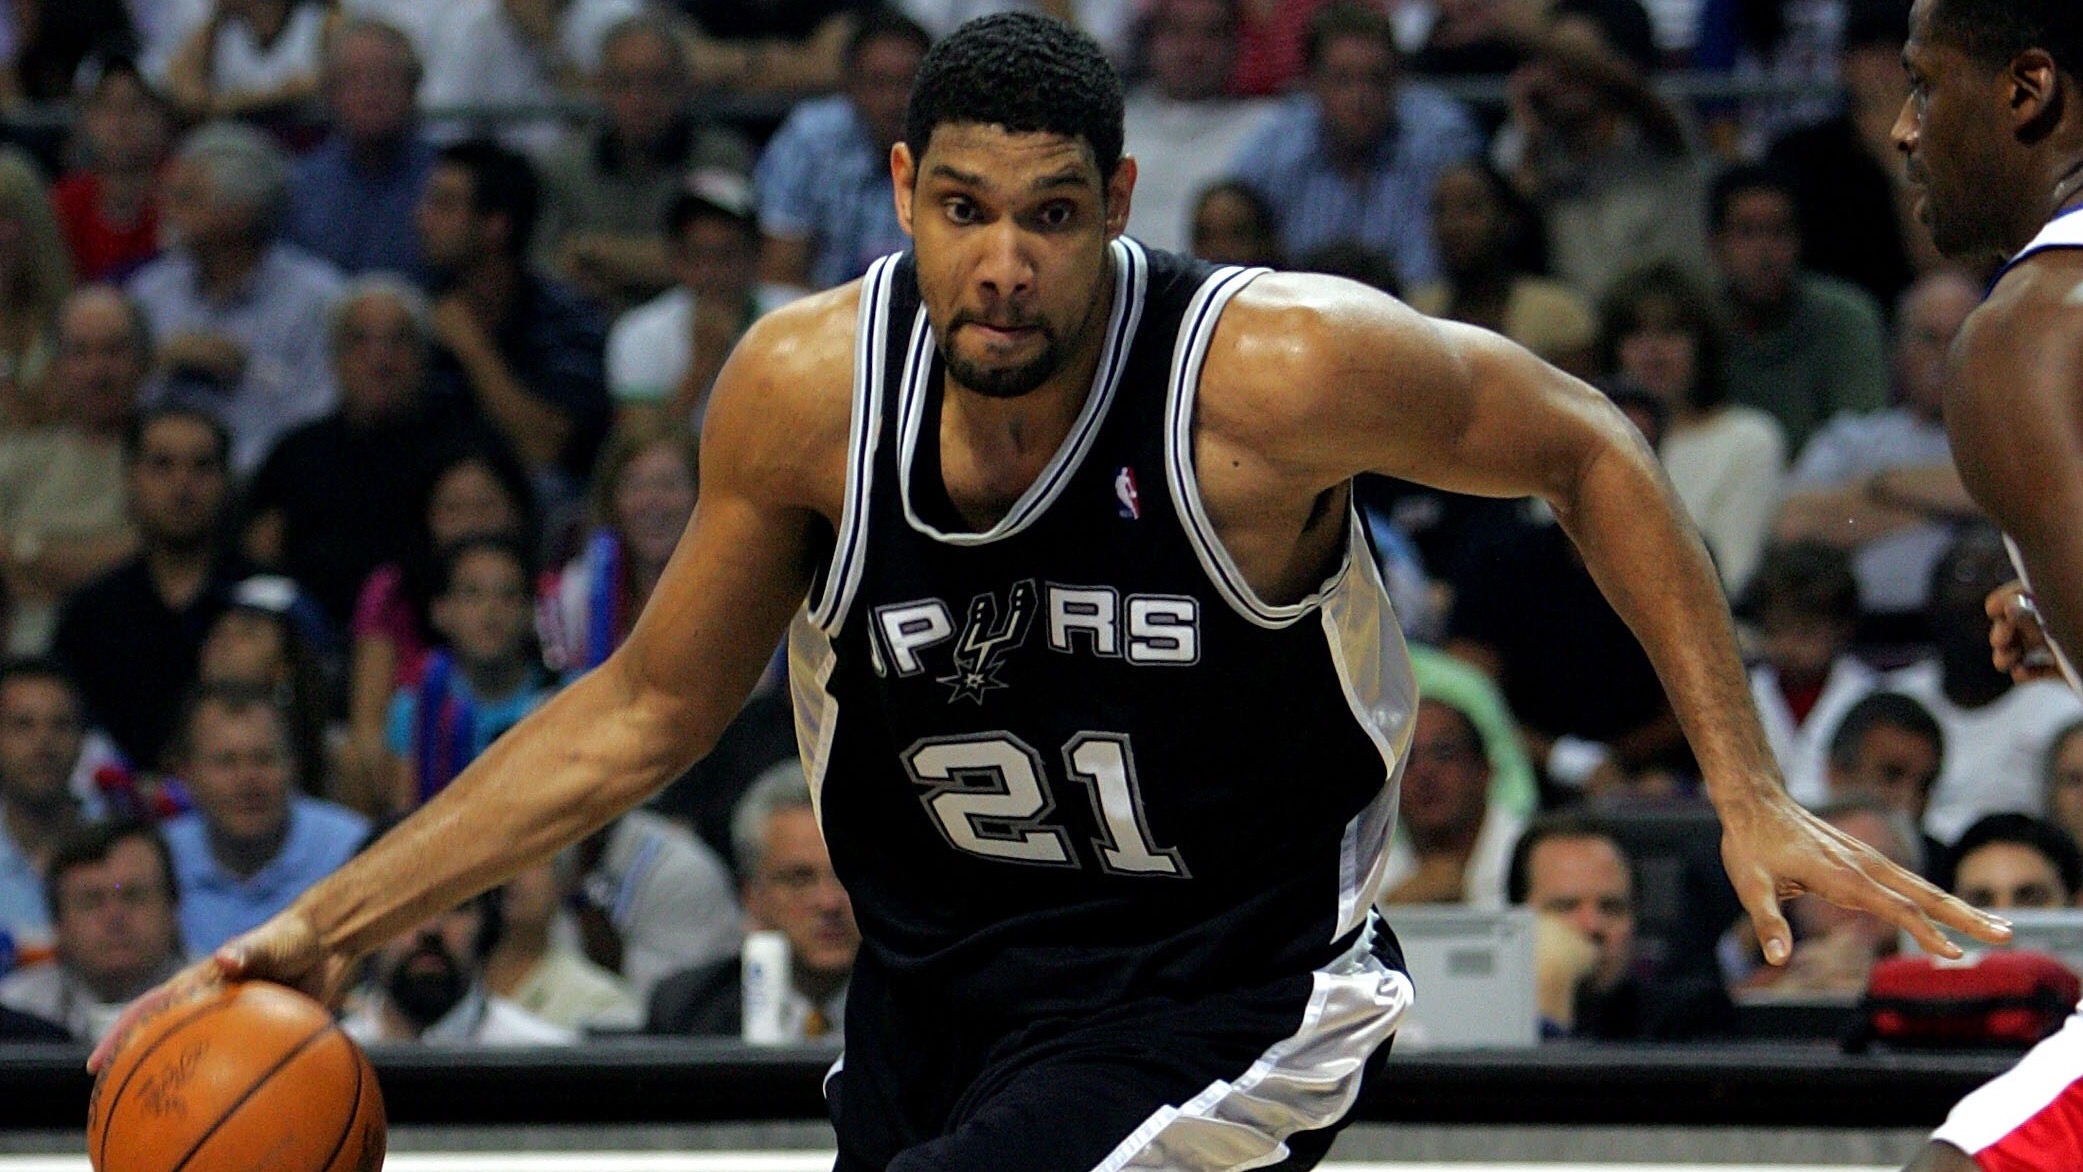 Duncan still prime-time star for Spurs in NBA playoffs